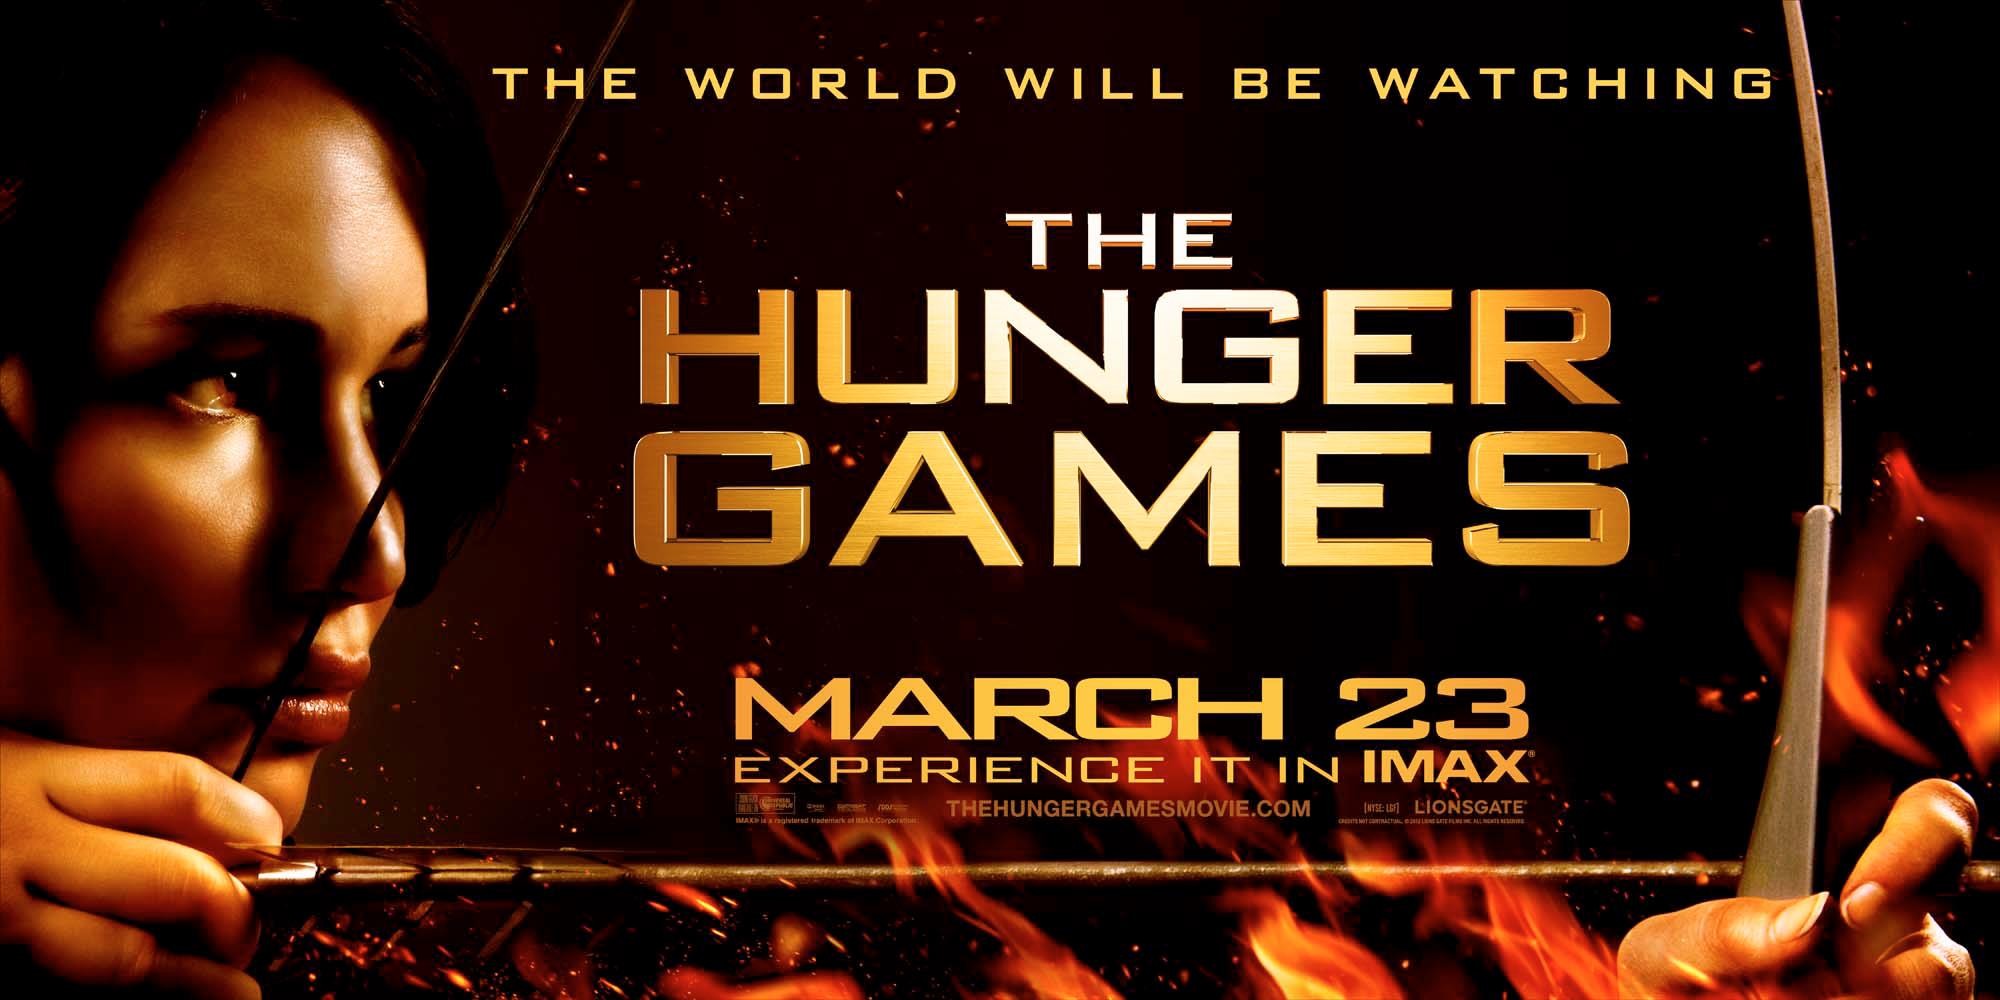 Mega Sized Movie Poster Image for The Hunger Games (#25 of 28)